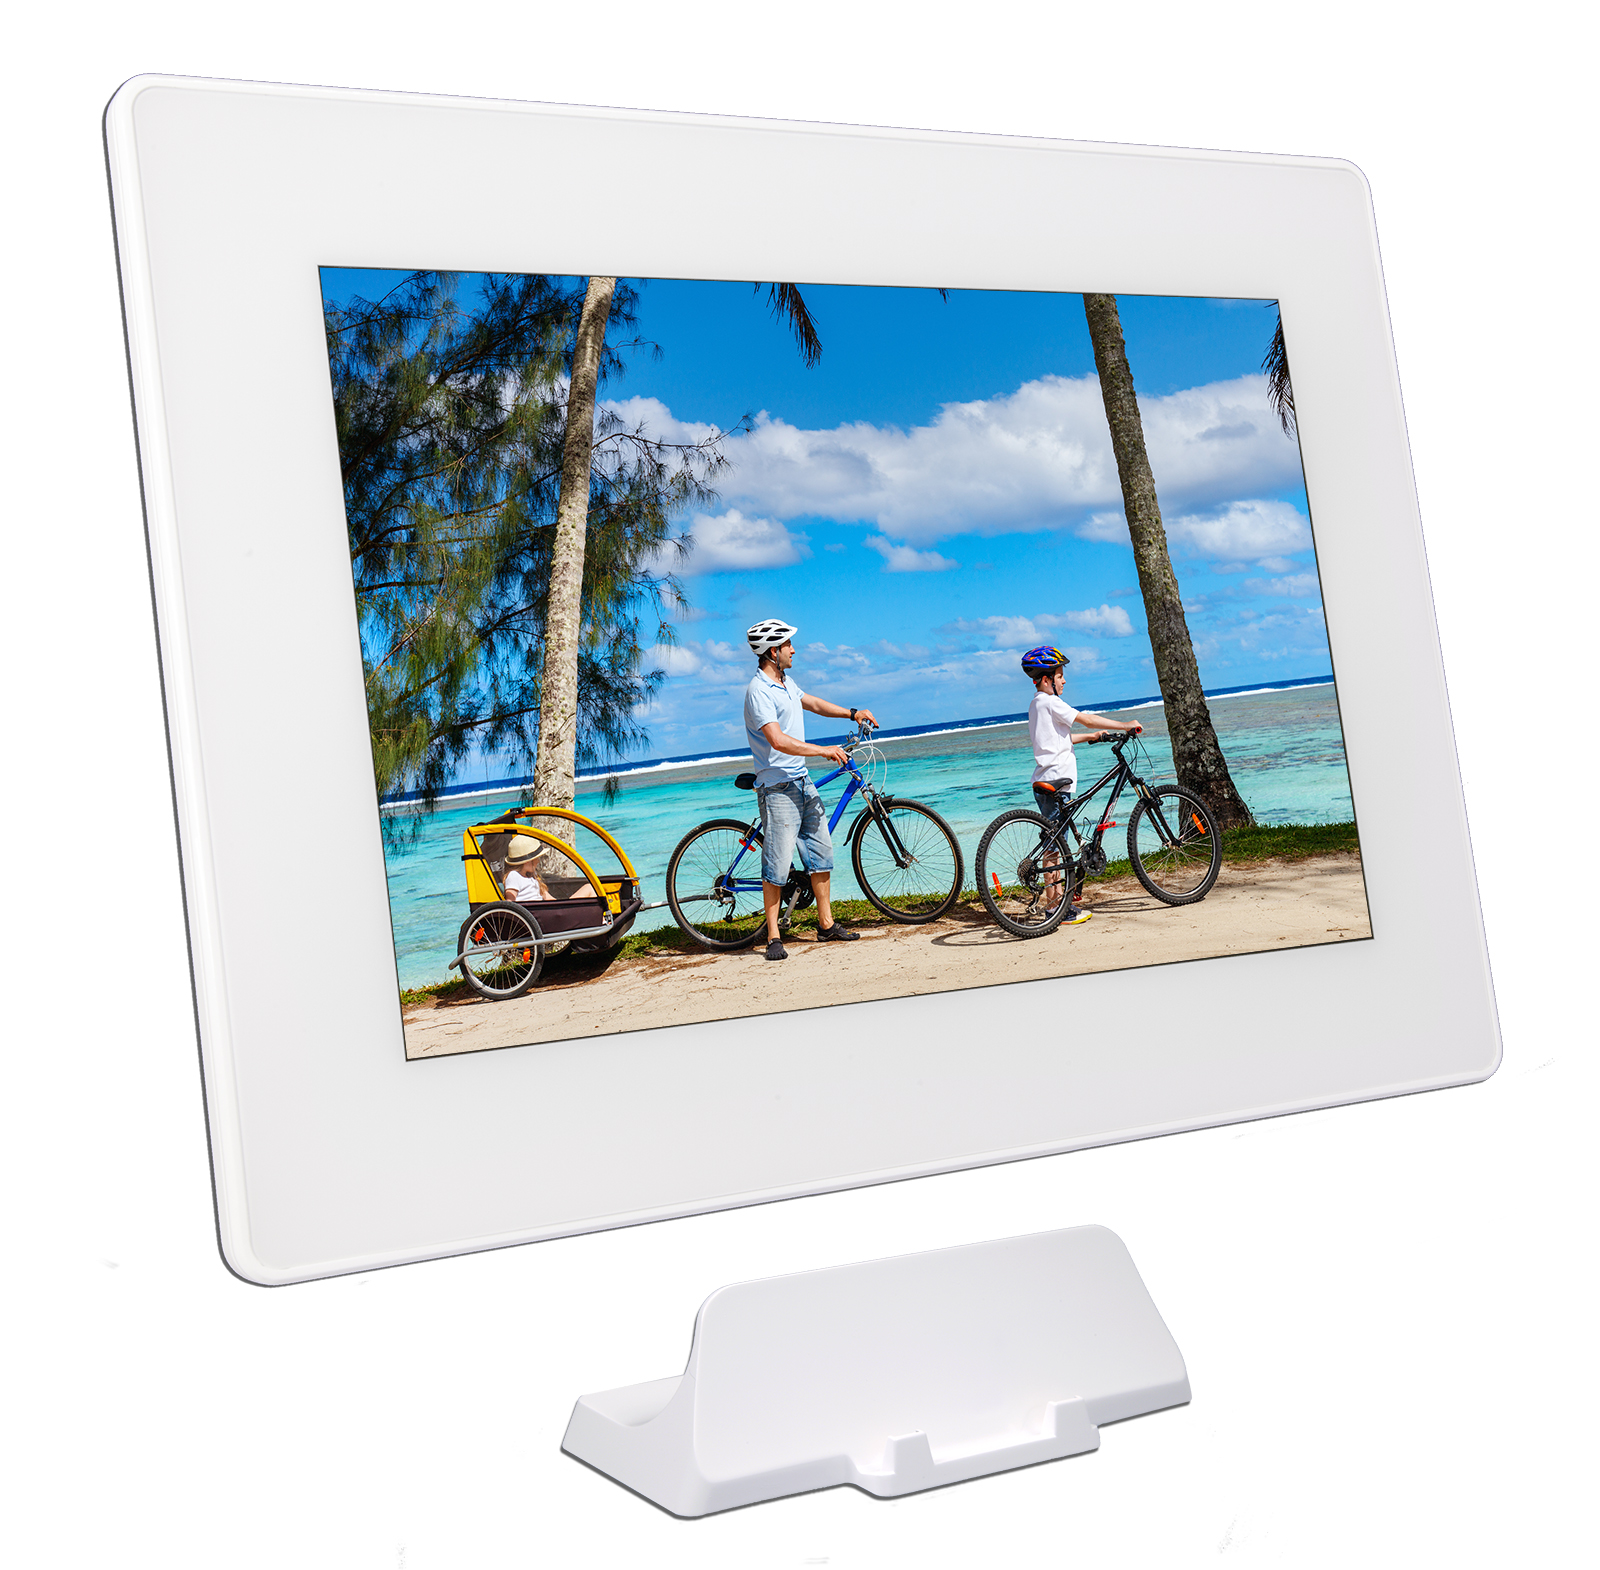 PhotoSpring digital photo frame showing charging stand